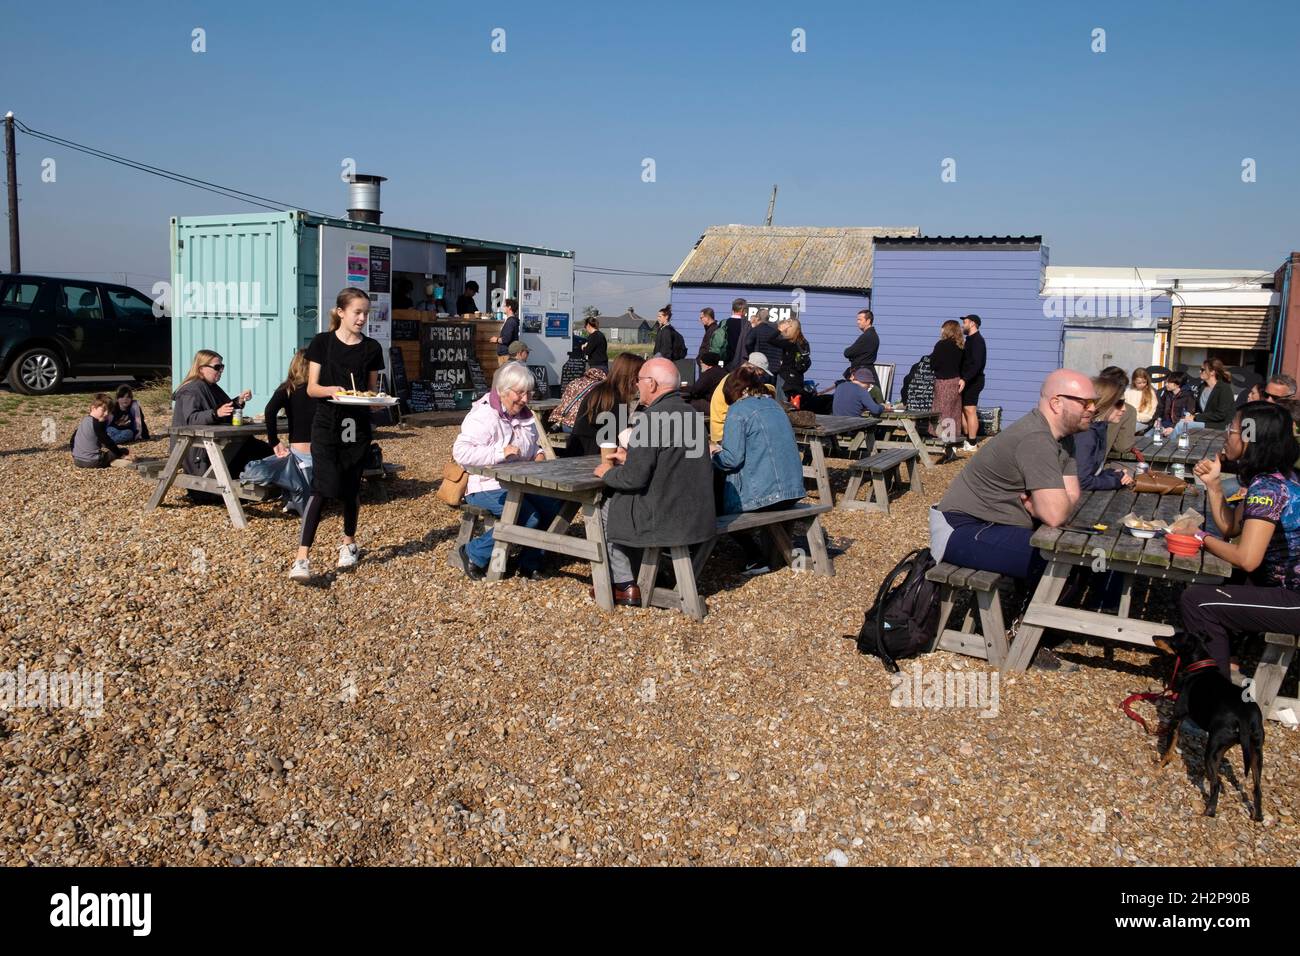 People customers at the Dungeness fish hut selling Fresh Local Fish Stock Photo